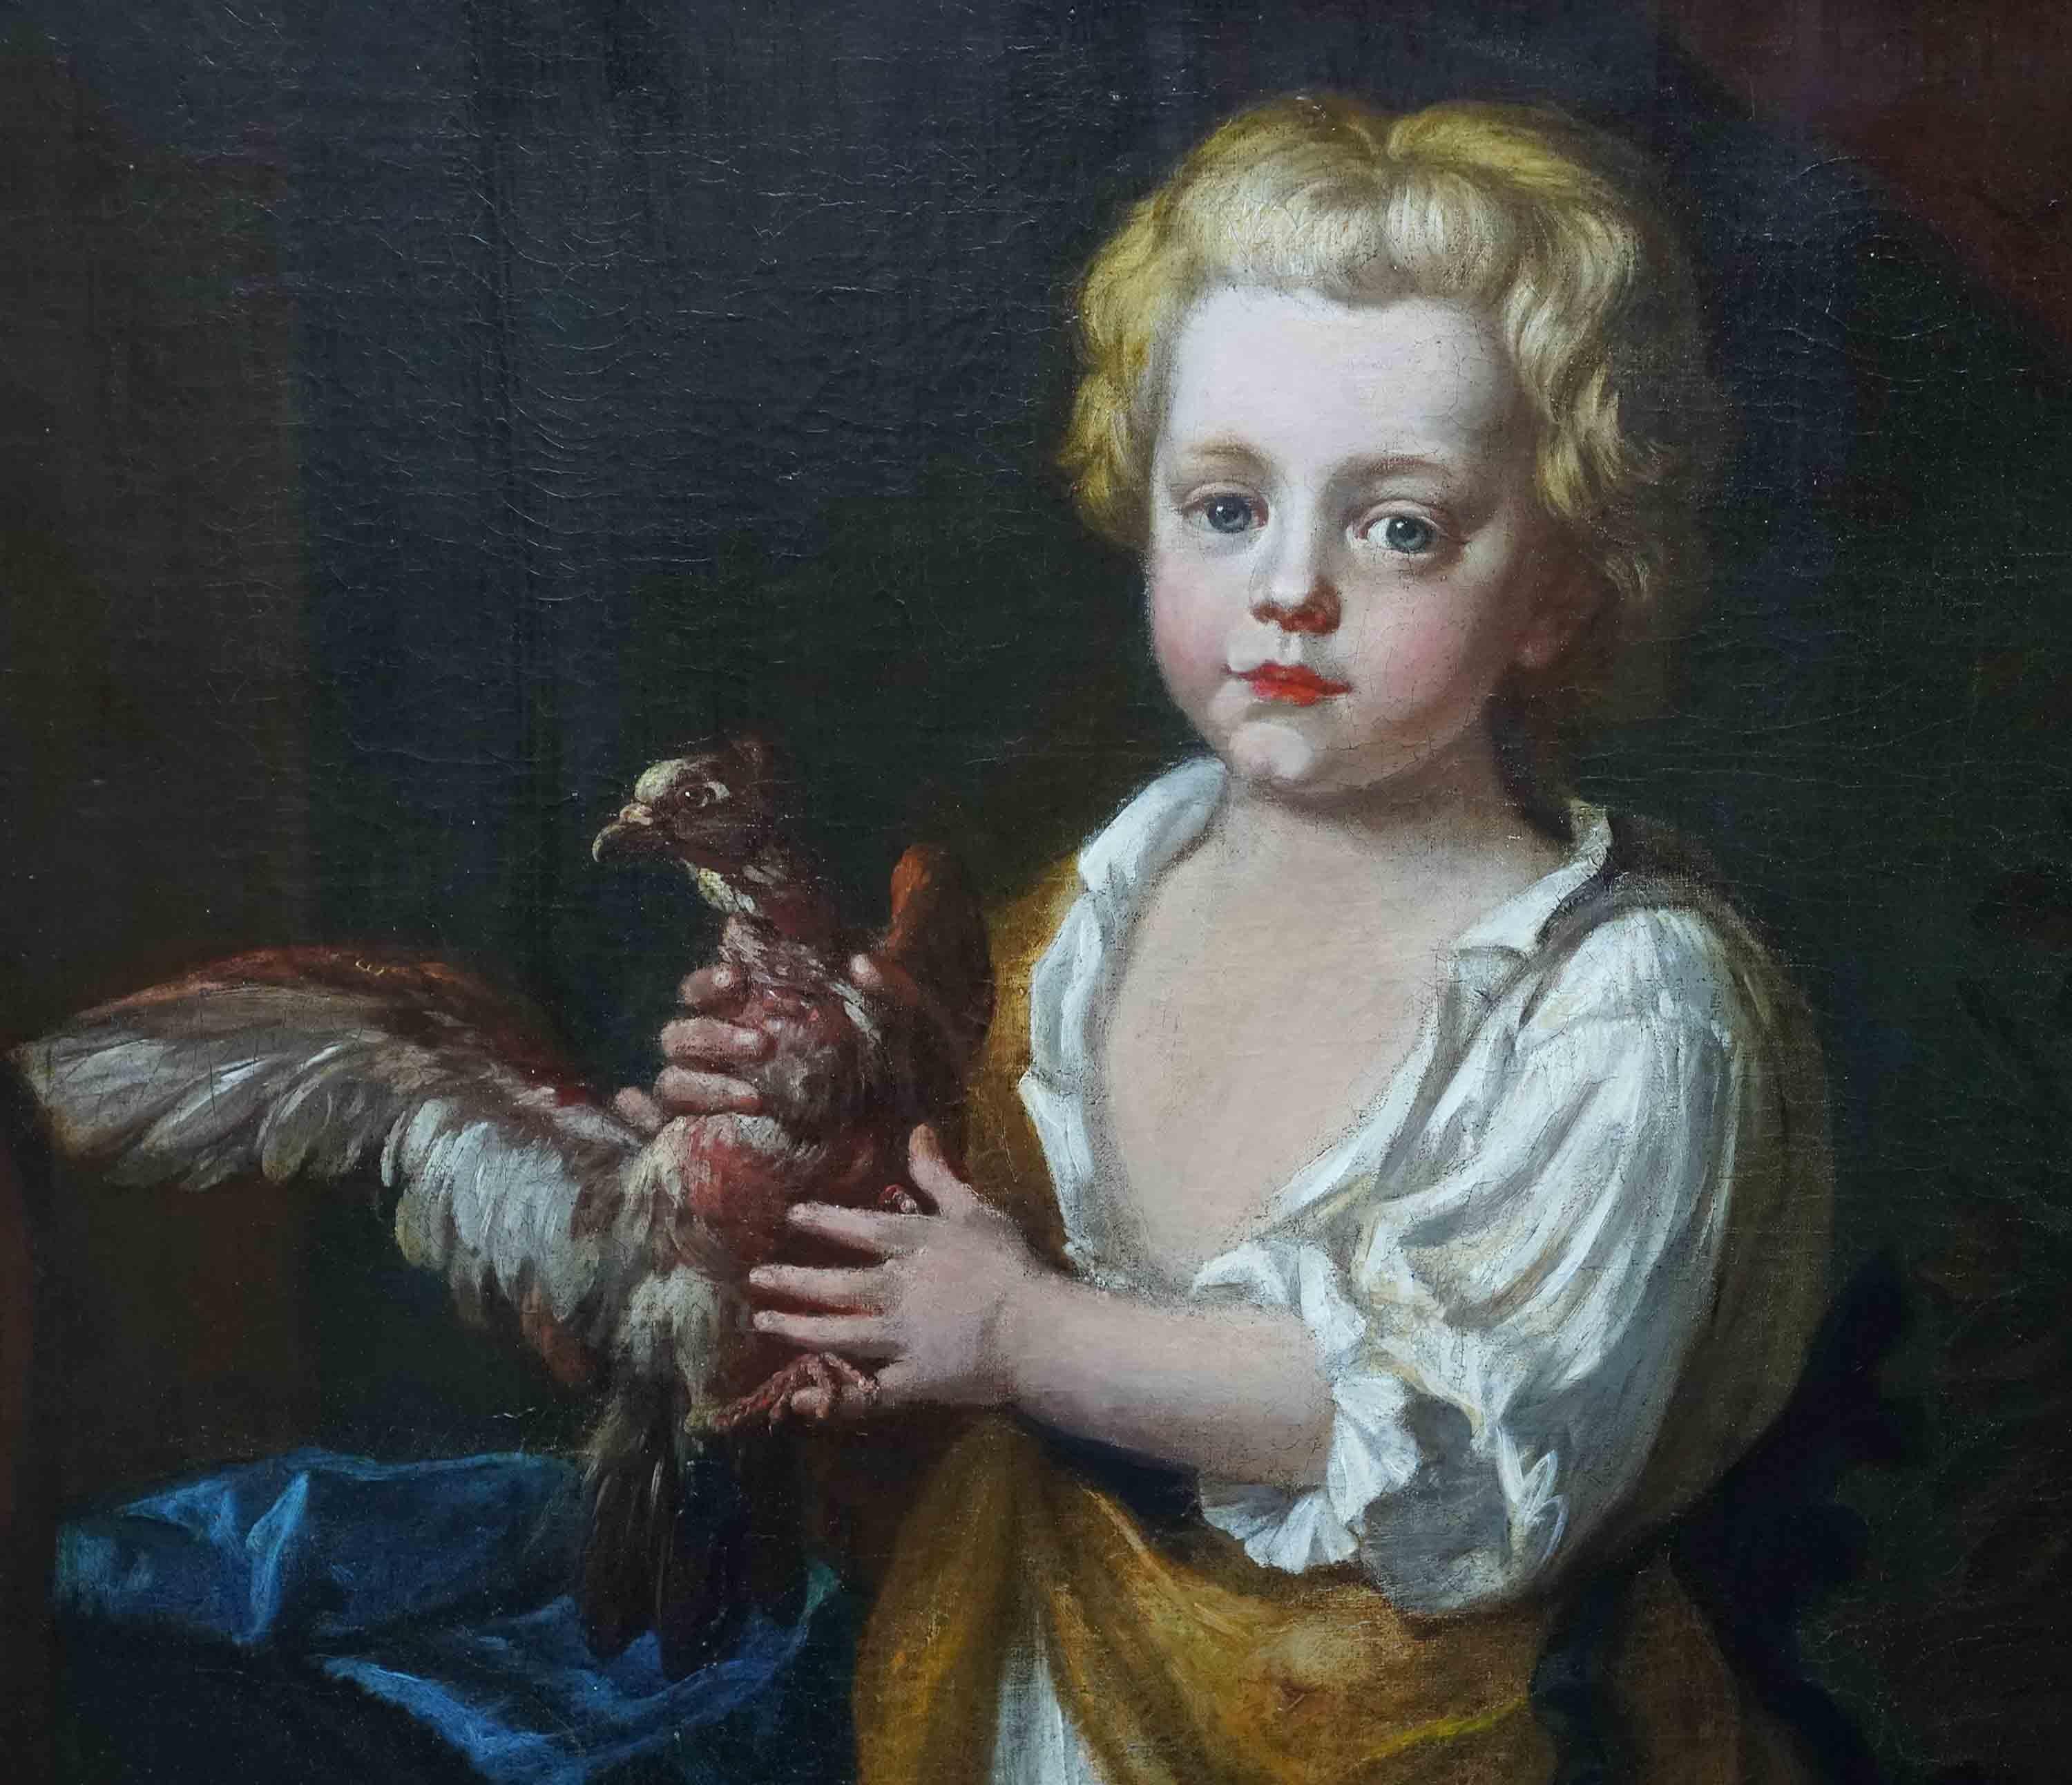 This stunning 17th century Old Master portrait oil painting is attributed to Godfrey Kneller. Painted circa 1680 it is a superb full length portrait of a blonde haired boy holding a struggling bird. He is bare foot and dressed in a white shirt with